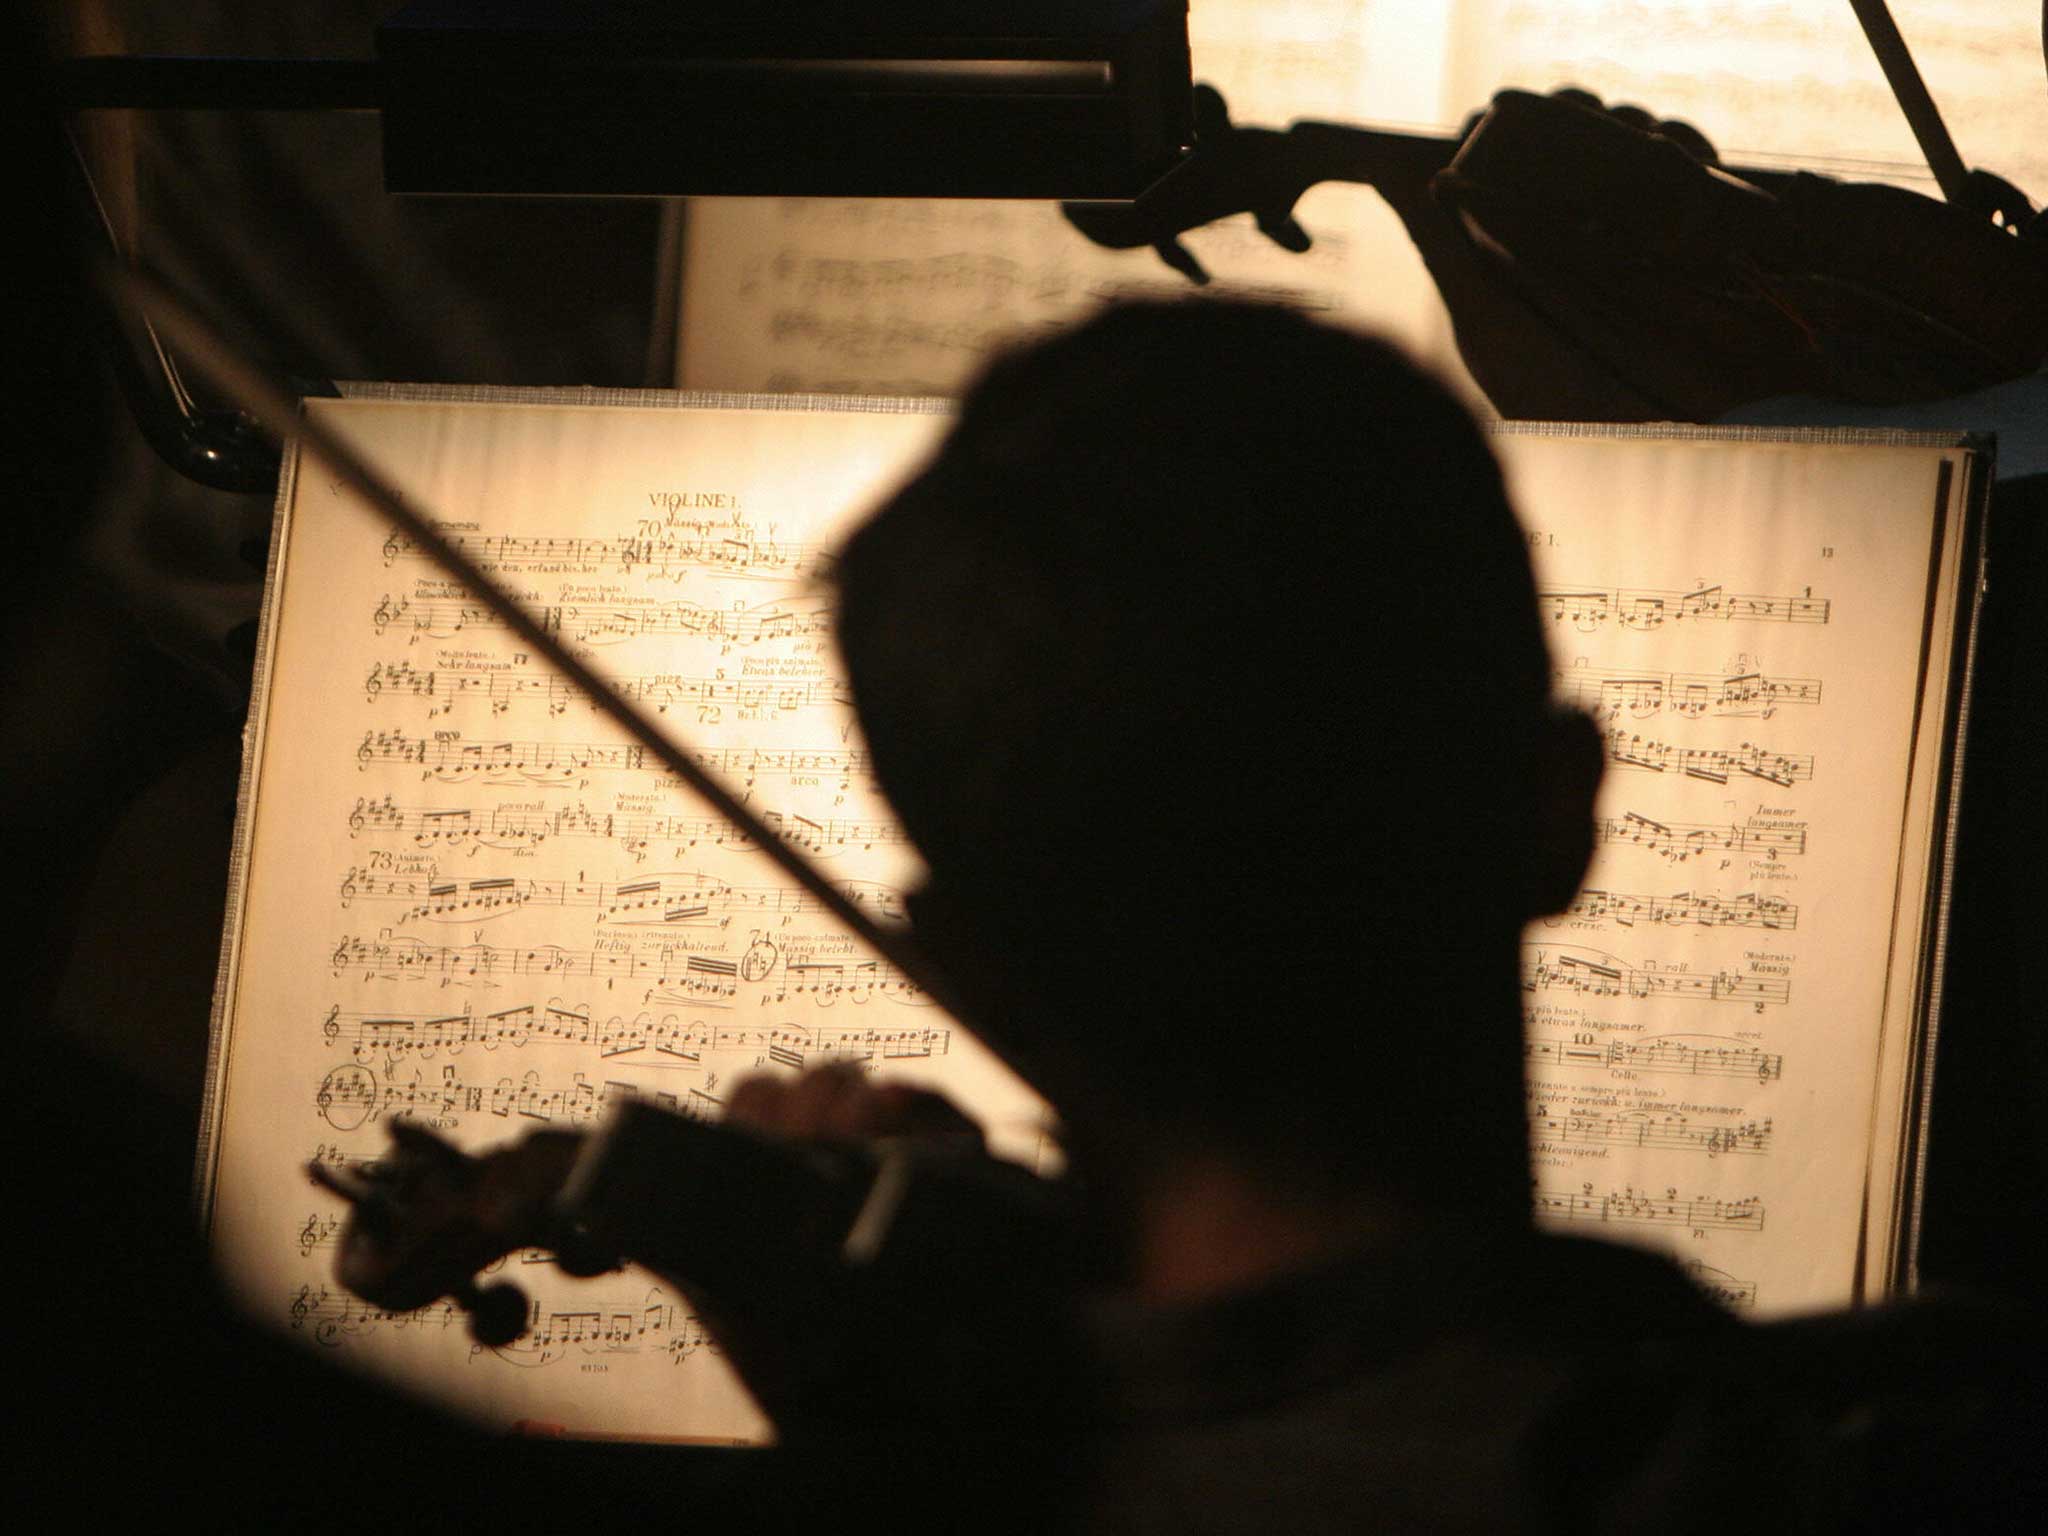 School music lessons could reduce as councils are overstretched, report warns